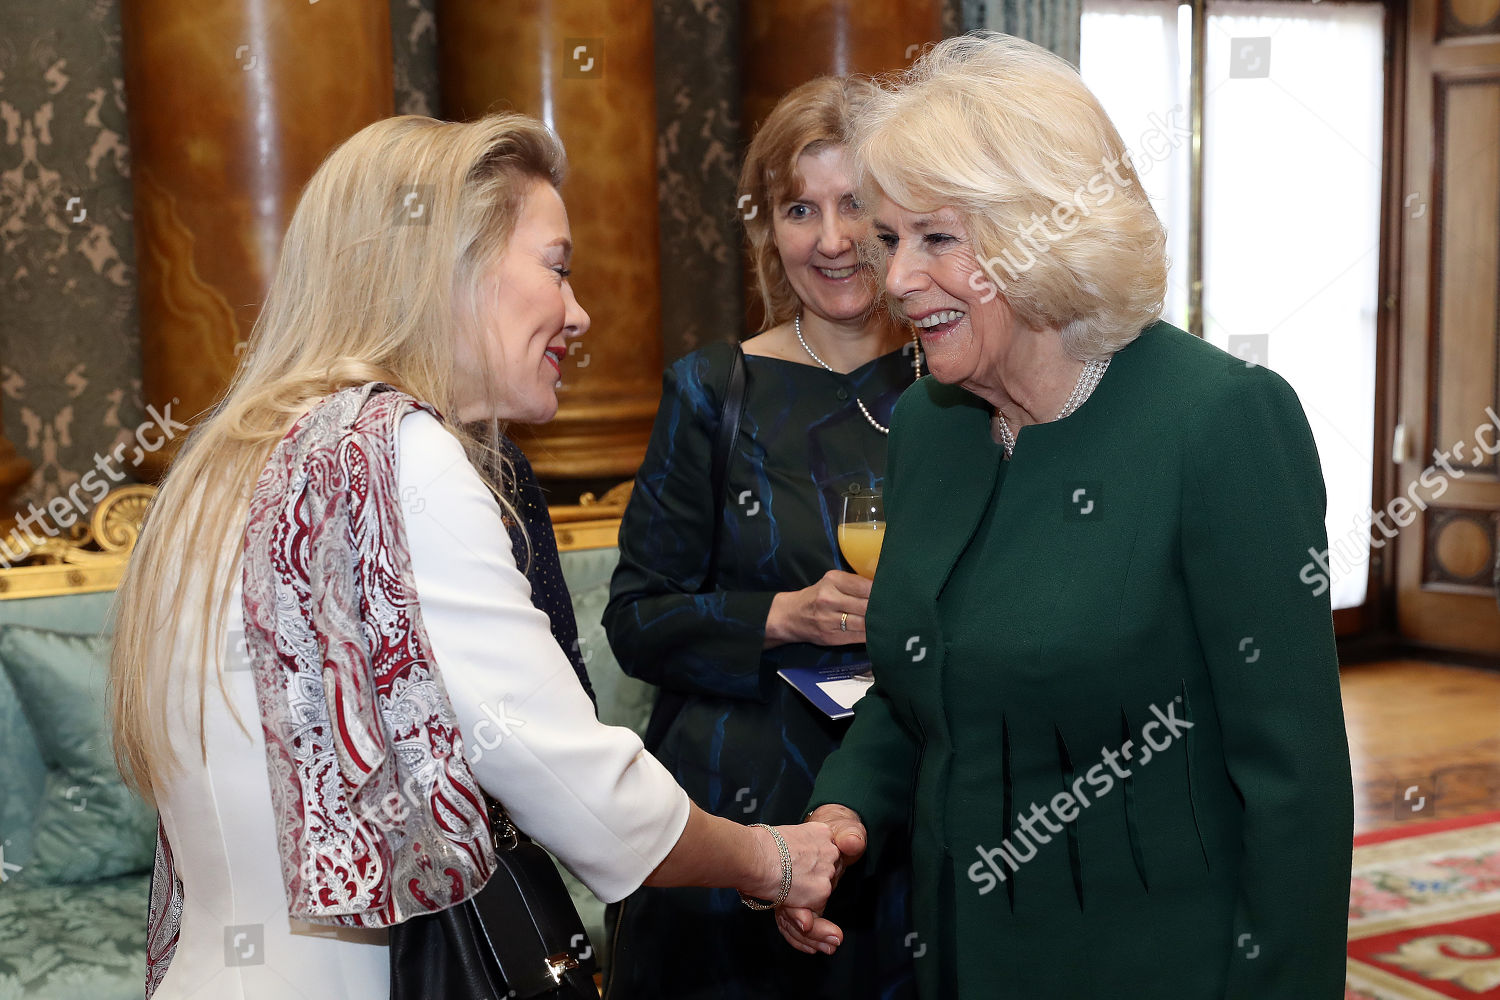 CASA REAL BRITÁNICA - Página 28 Queens-anniversary-prizes-for-higher-and-further-education-at-buckingham-palace-london-uk-shutterstock-editorial-10562241j